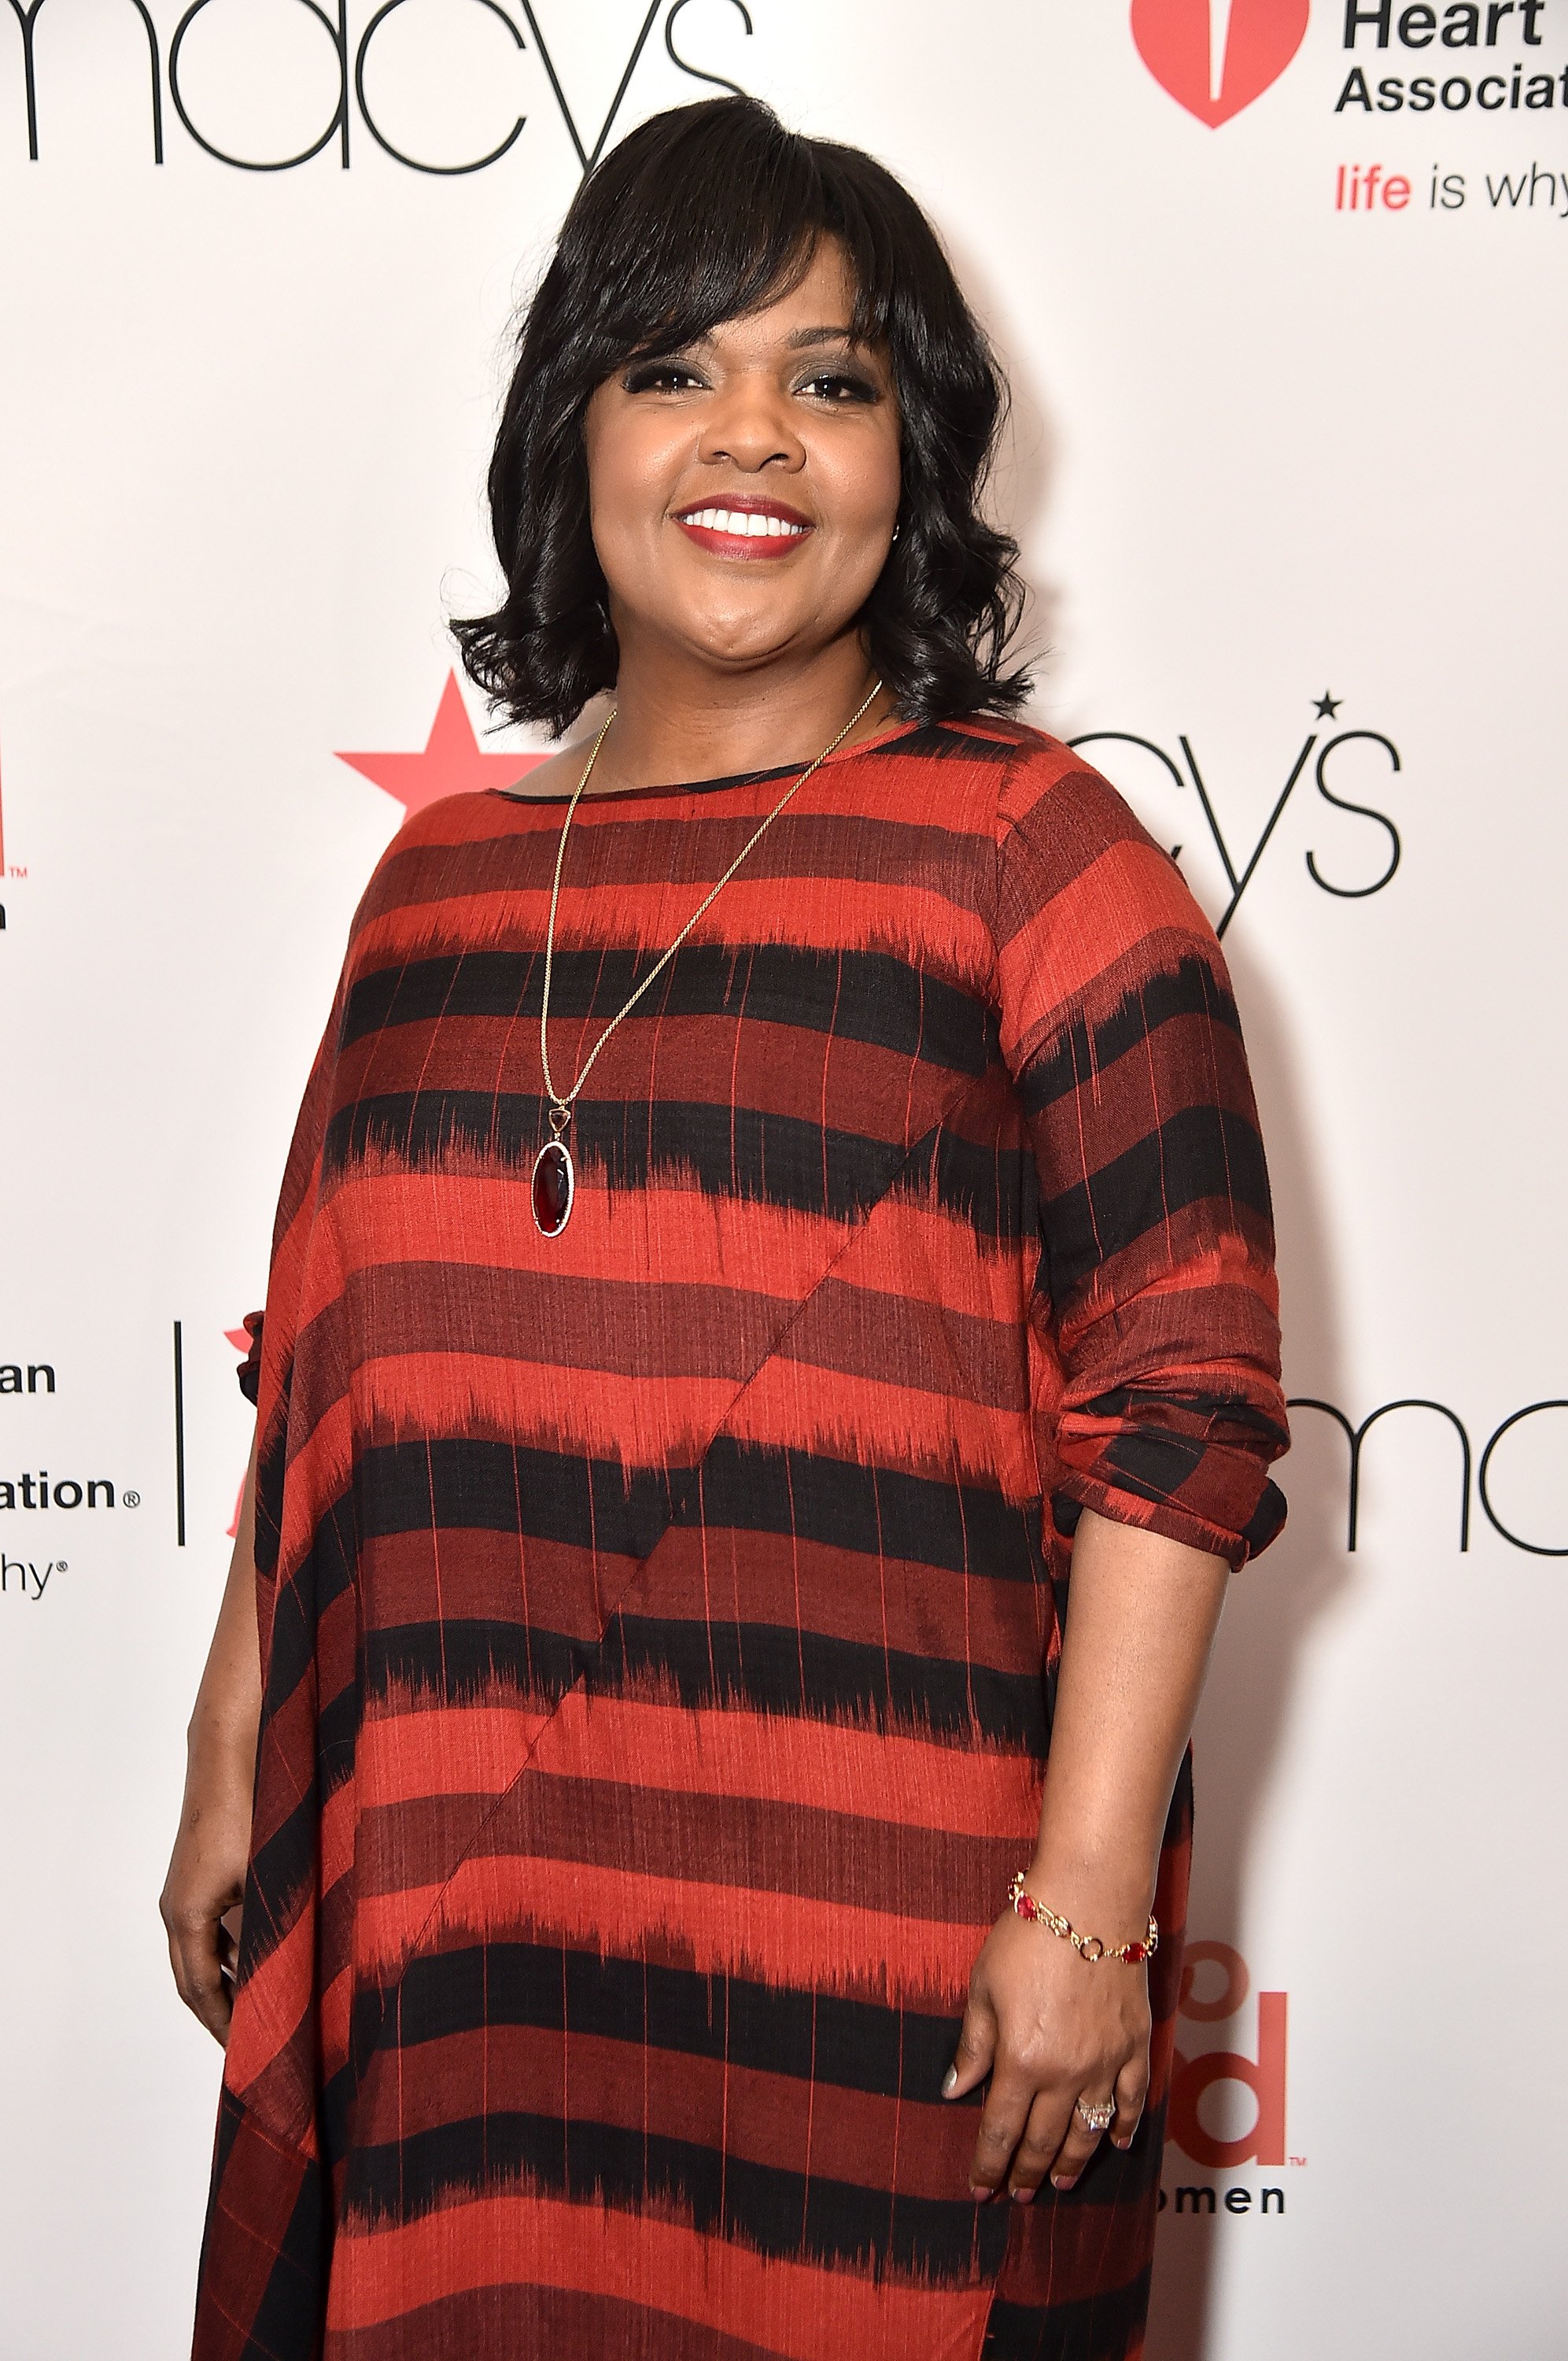 CeCe Winans attends the Go Red For Women Red Dress Collection in New York City on February 8, 2018 | Photo: Getty Images